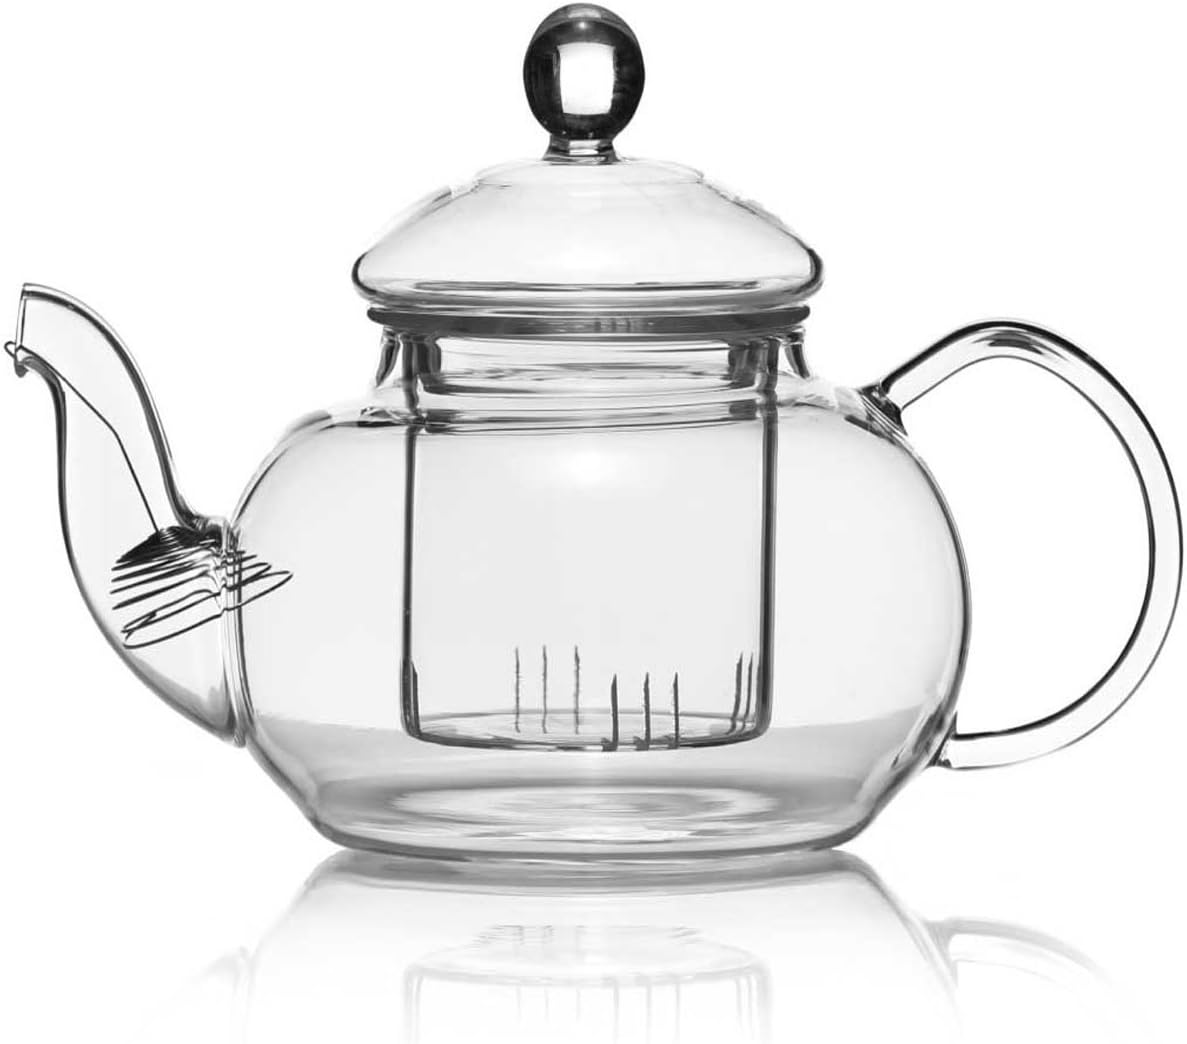 Hand Blown Borosilicate Solikat Glass Teapot with Filter and Infuser Teapot with filter insert by dimono